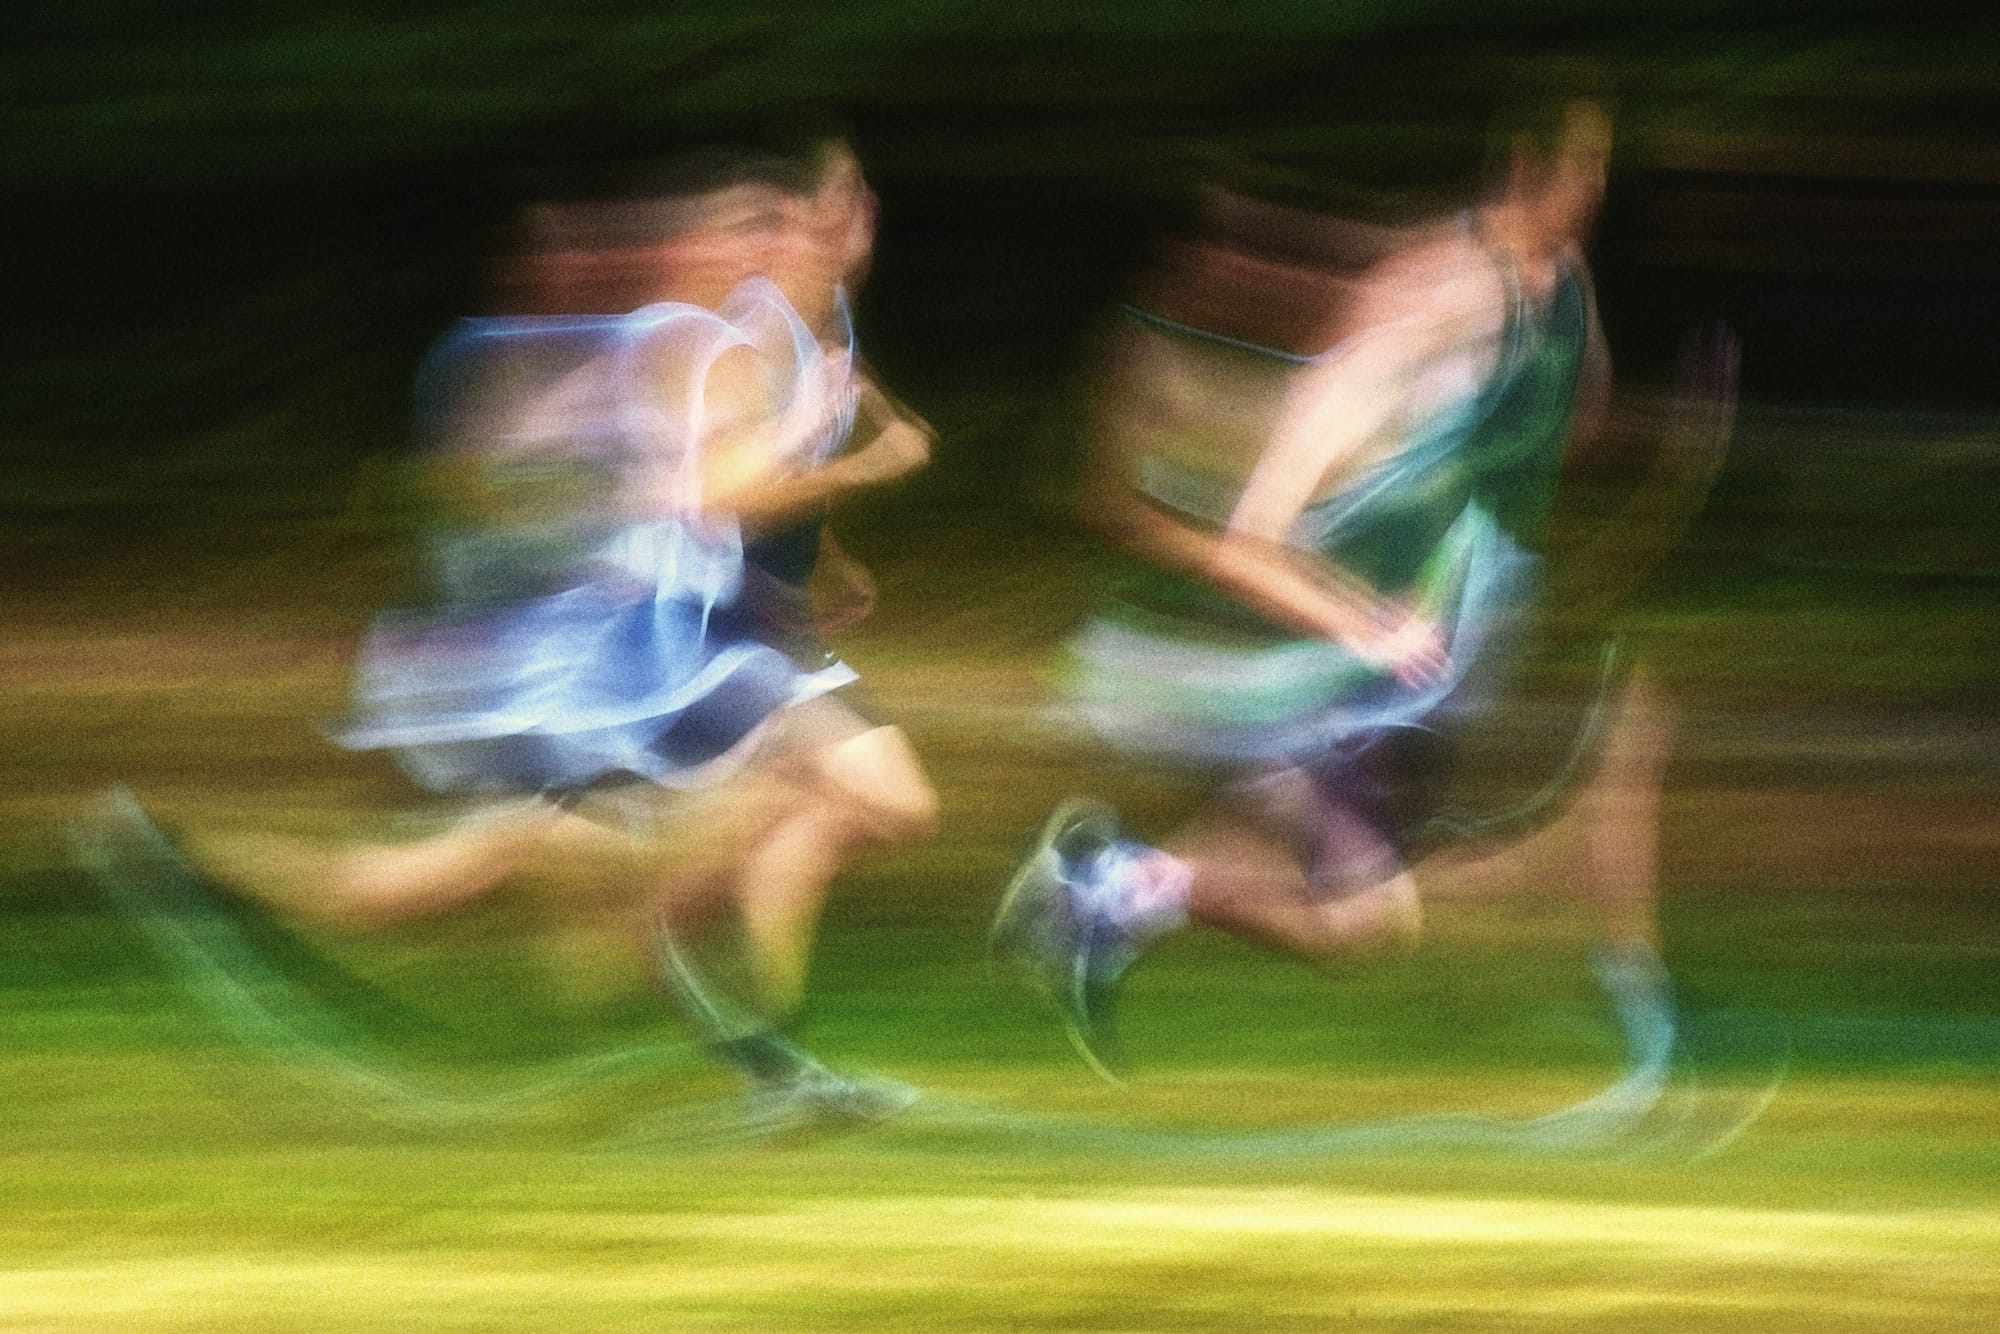 Panning is a classic technique that allows a photographer to create a sense of motion, as in this photo taken during a cross-country meet with Skyview,  Heritage and Evergreen high schools.